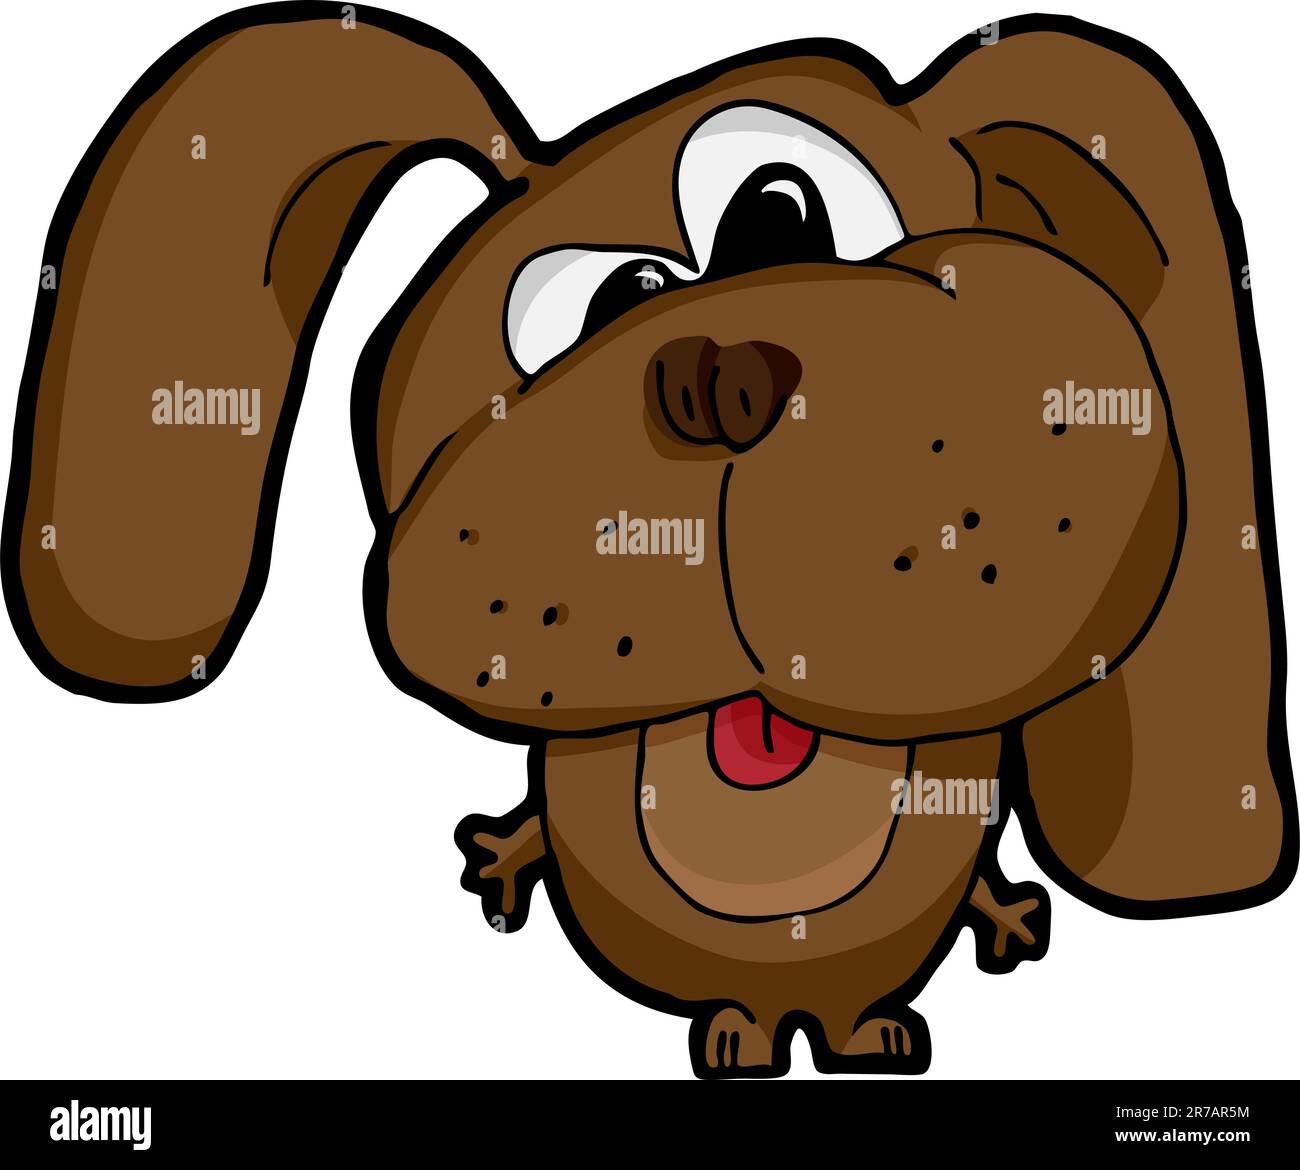 Cartoon of a cross-eyed silly dog on white background Stock Vector